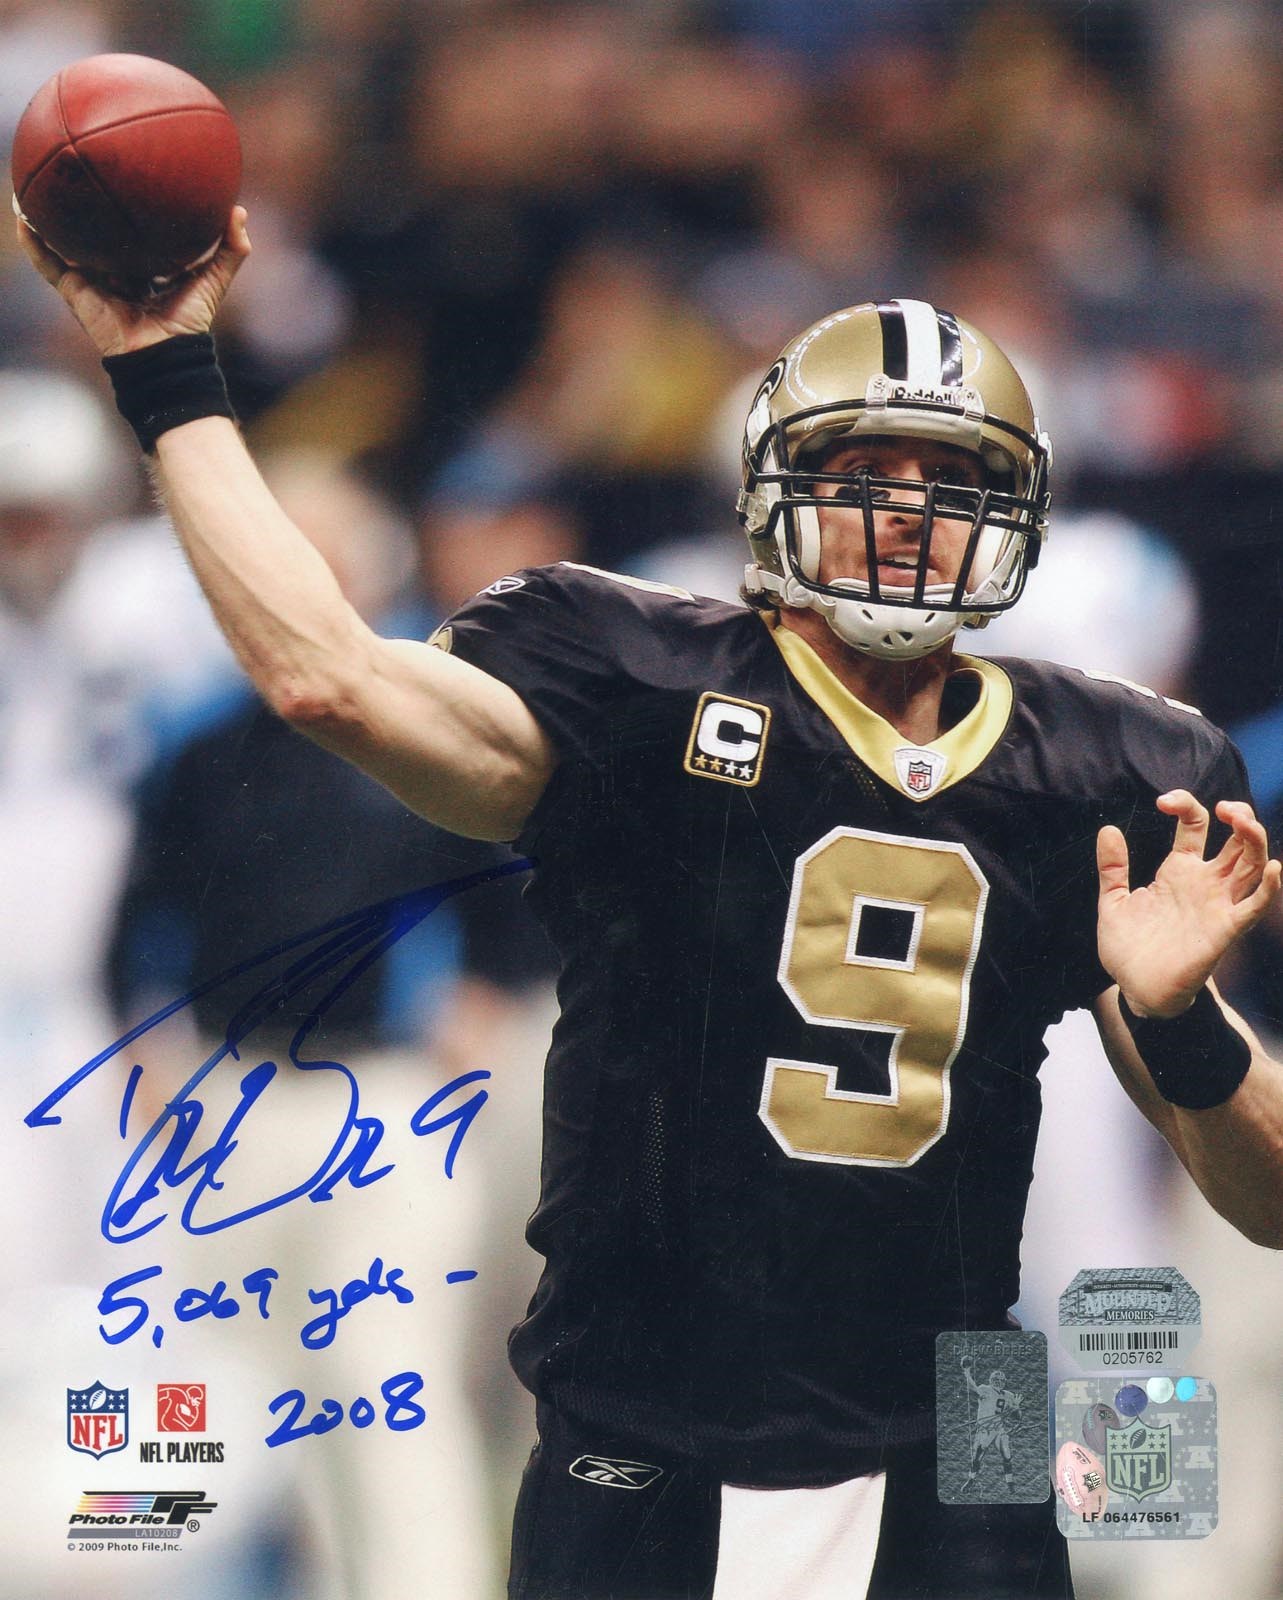 - Drew Brees "5,069 yds - 2008" Signed Inscribed Photo (Brees Holo & Mounted Memories)